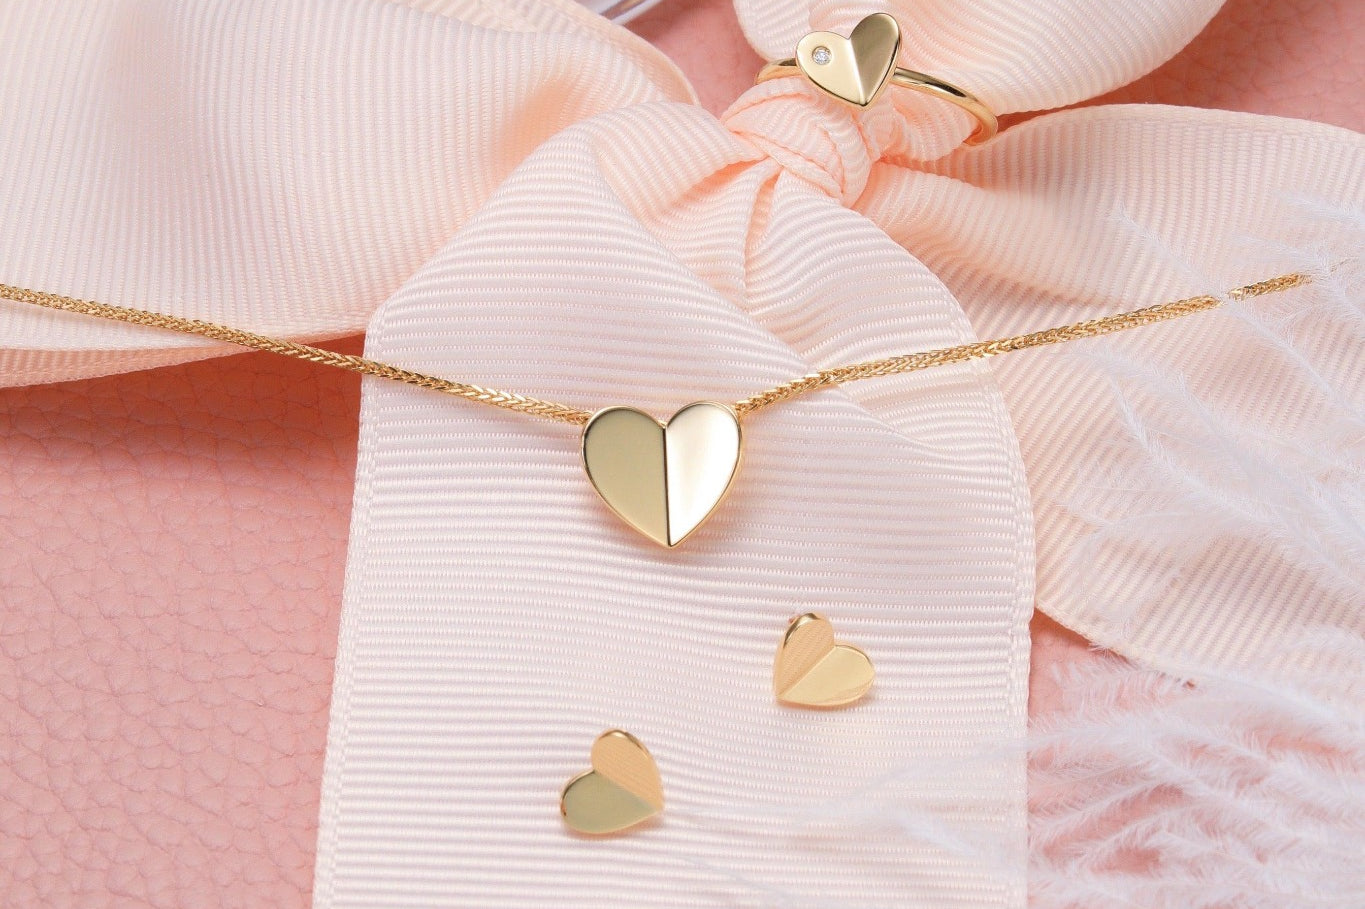 18K Gold Heart Necklace